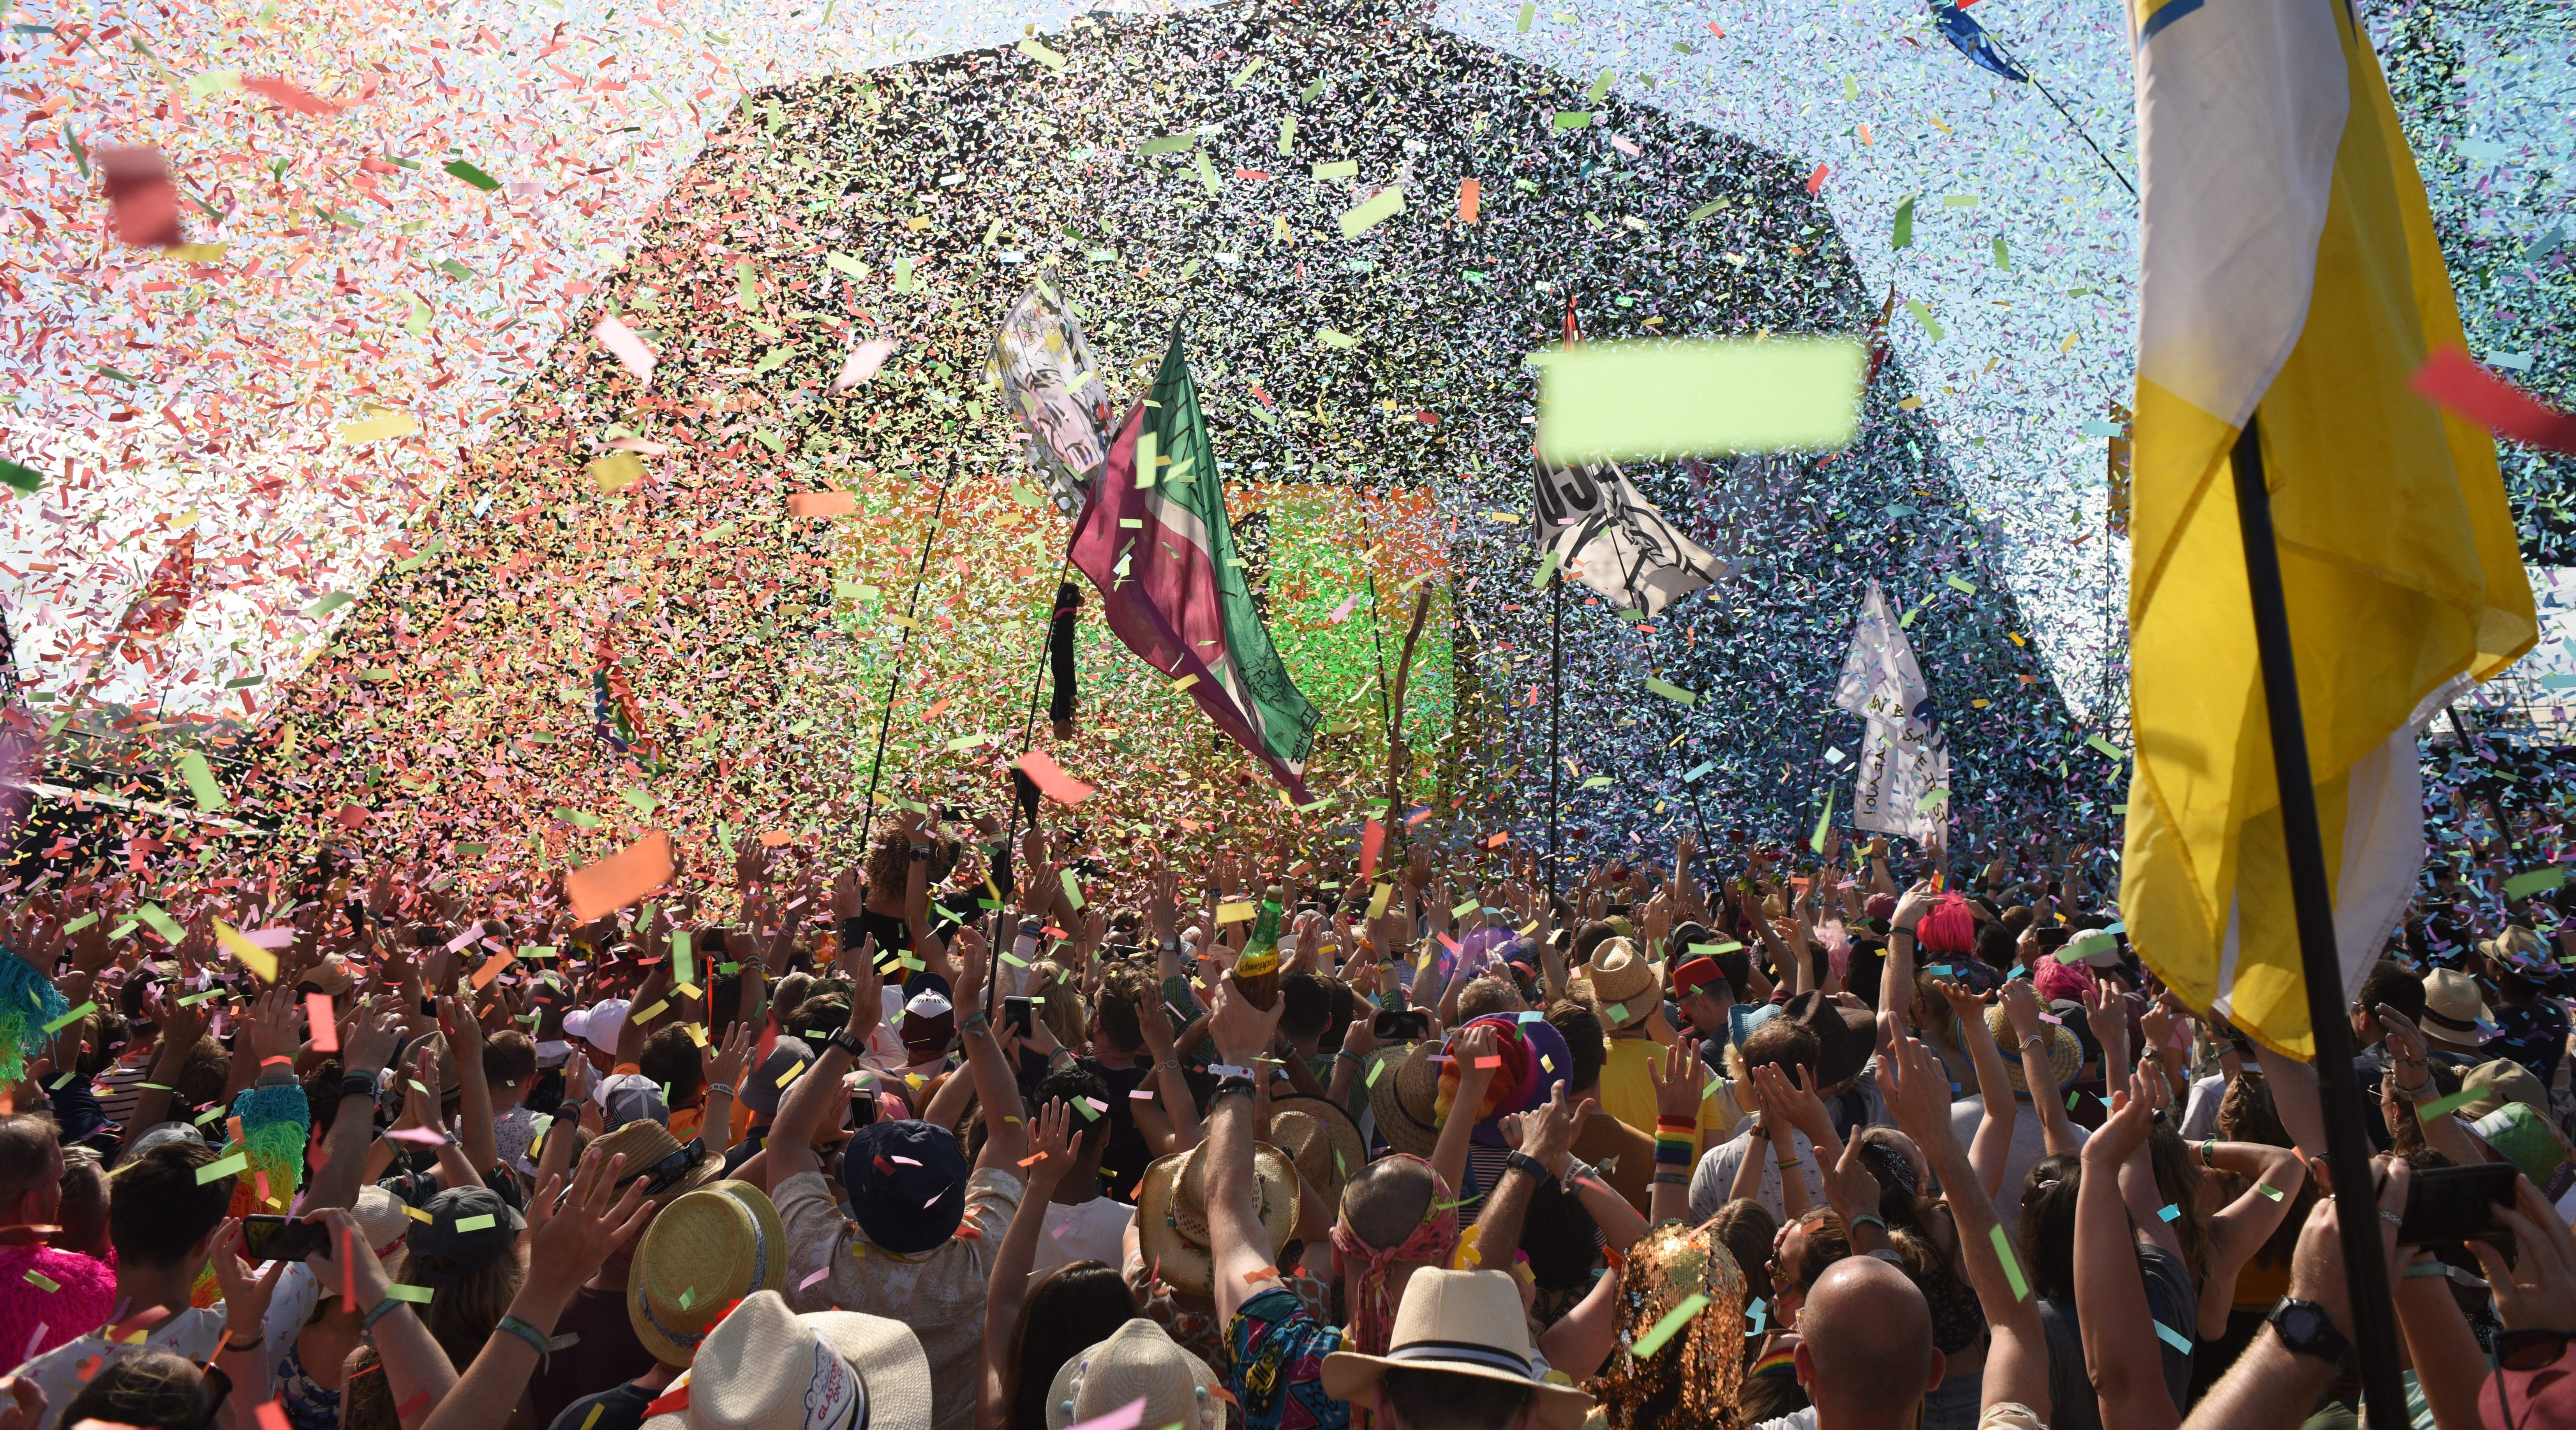 I’m nearly 70 and have been going to Glastonbury for 42 years – you’re never too old